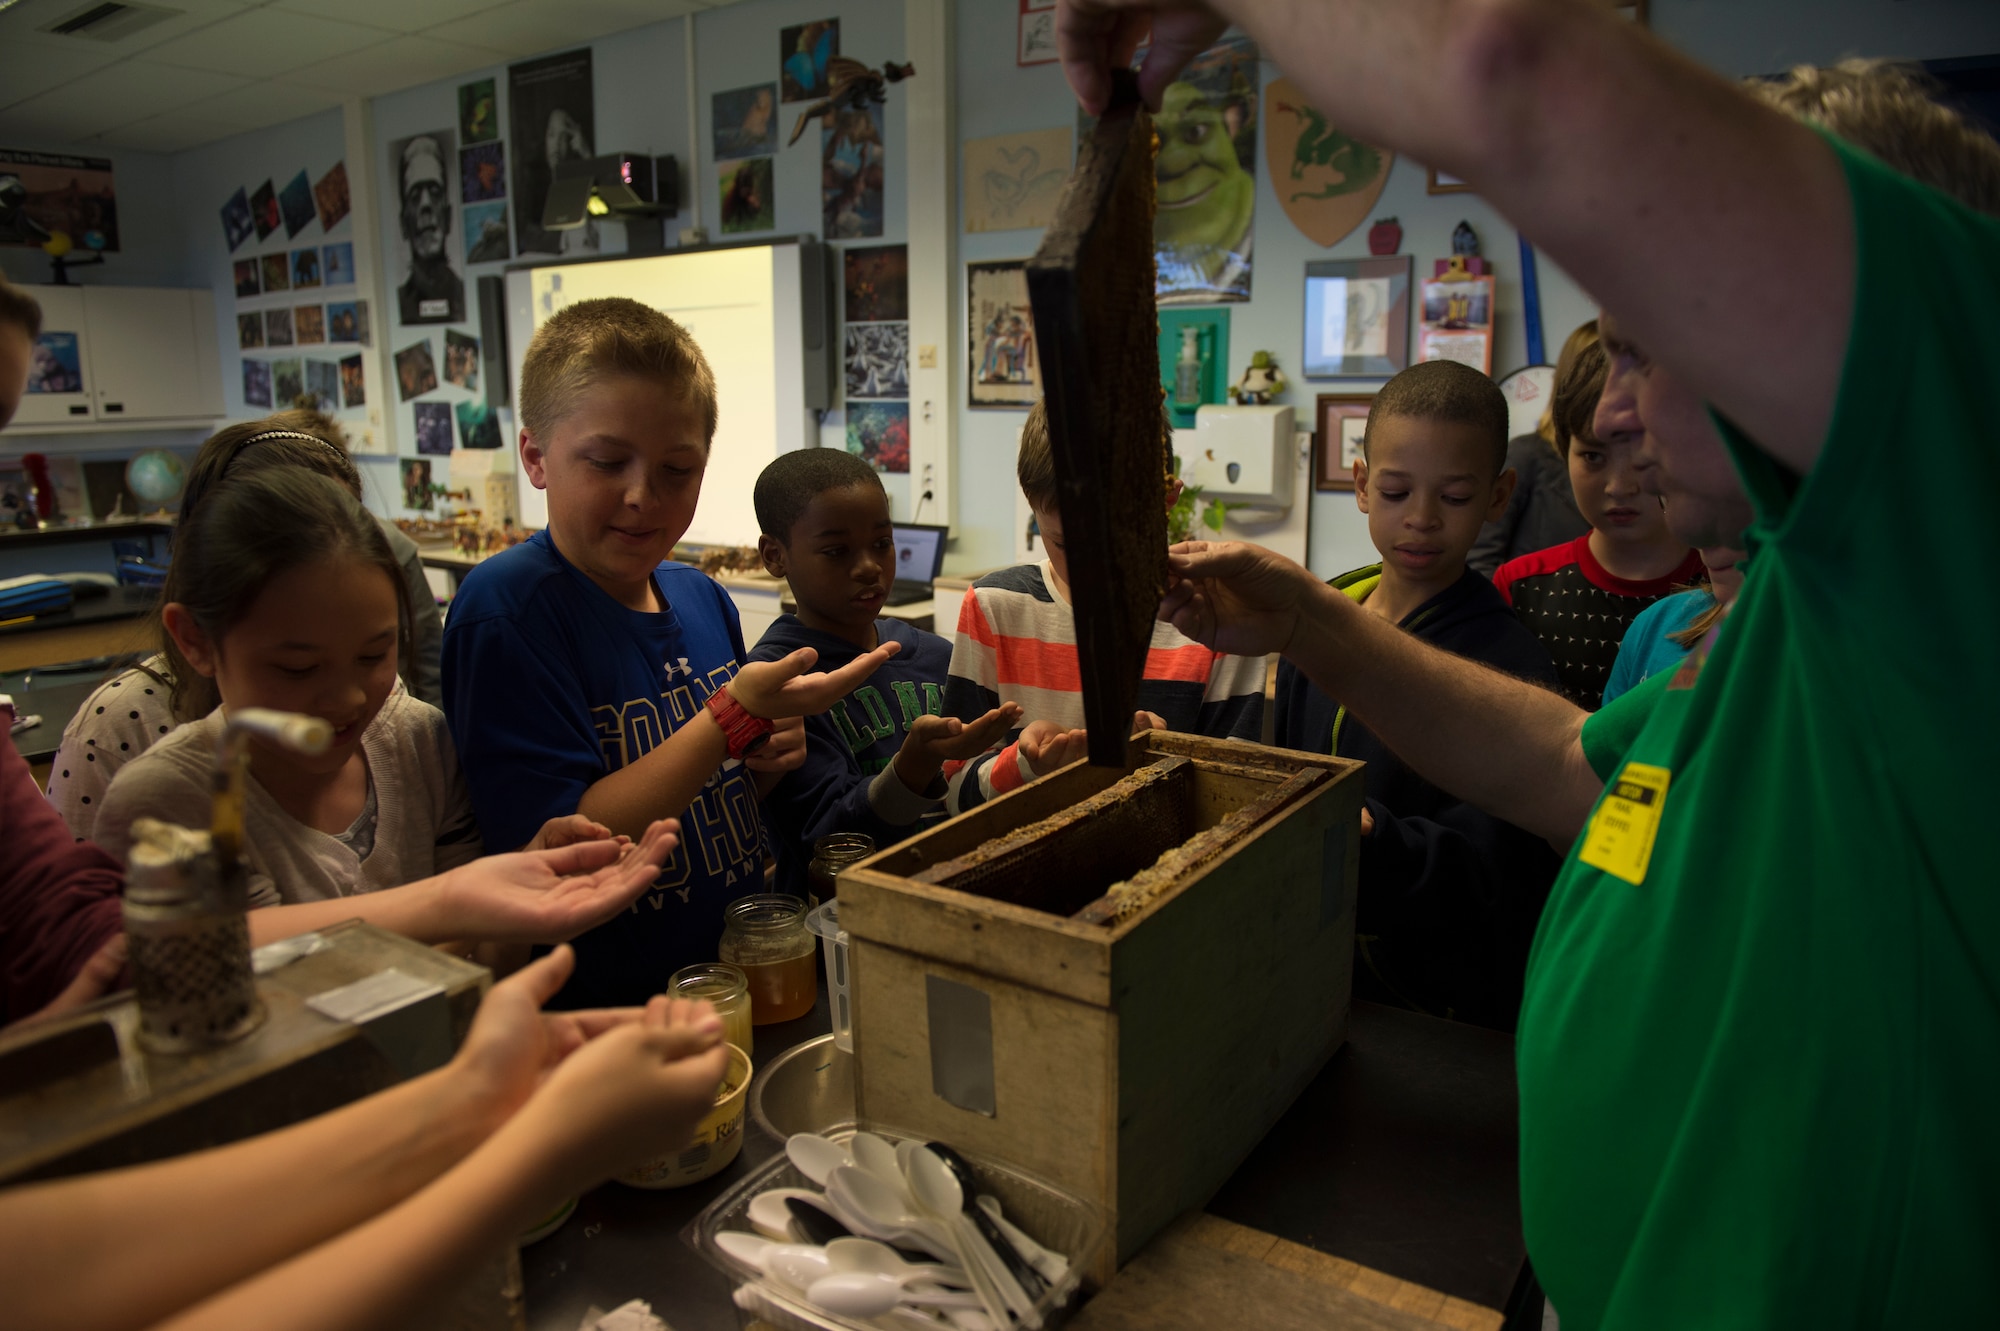 Franz Steffes, 52nd Civil Engineer Squadron conservation program manager, displays a honey comb tray of a European Honey Bee to Spangdahlem Middle School students during an Earth Day classroom presentation at Spangdahlem Air Base, Germany, April 22, 2015.  Earth Day is observed worldwide to promote the environment and spread awareness of the dangers harming it. (U.S. Air Force photo by Staff Sgt. Christopher Ruano/Released)